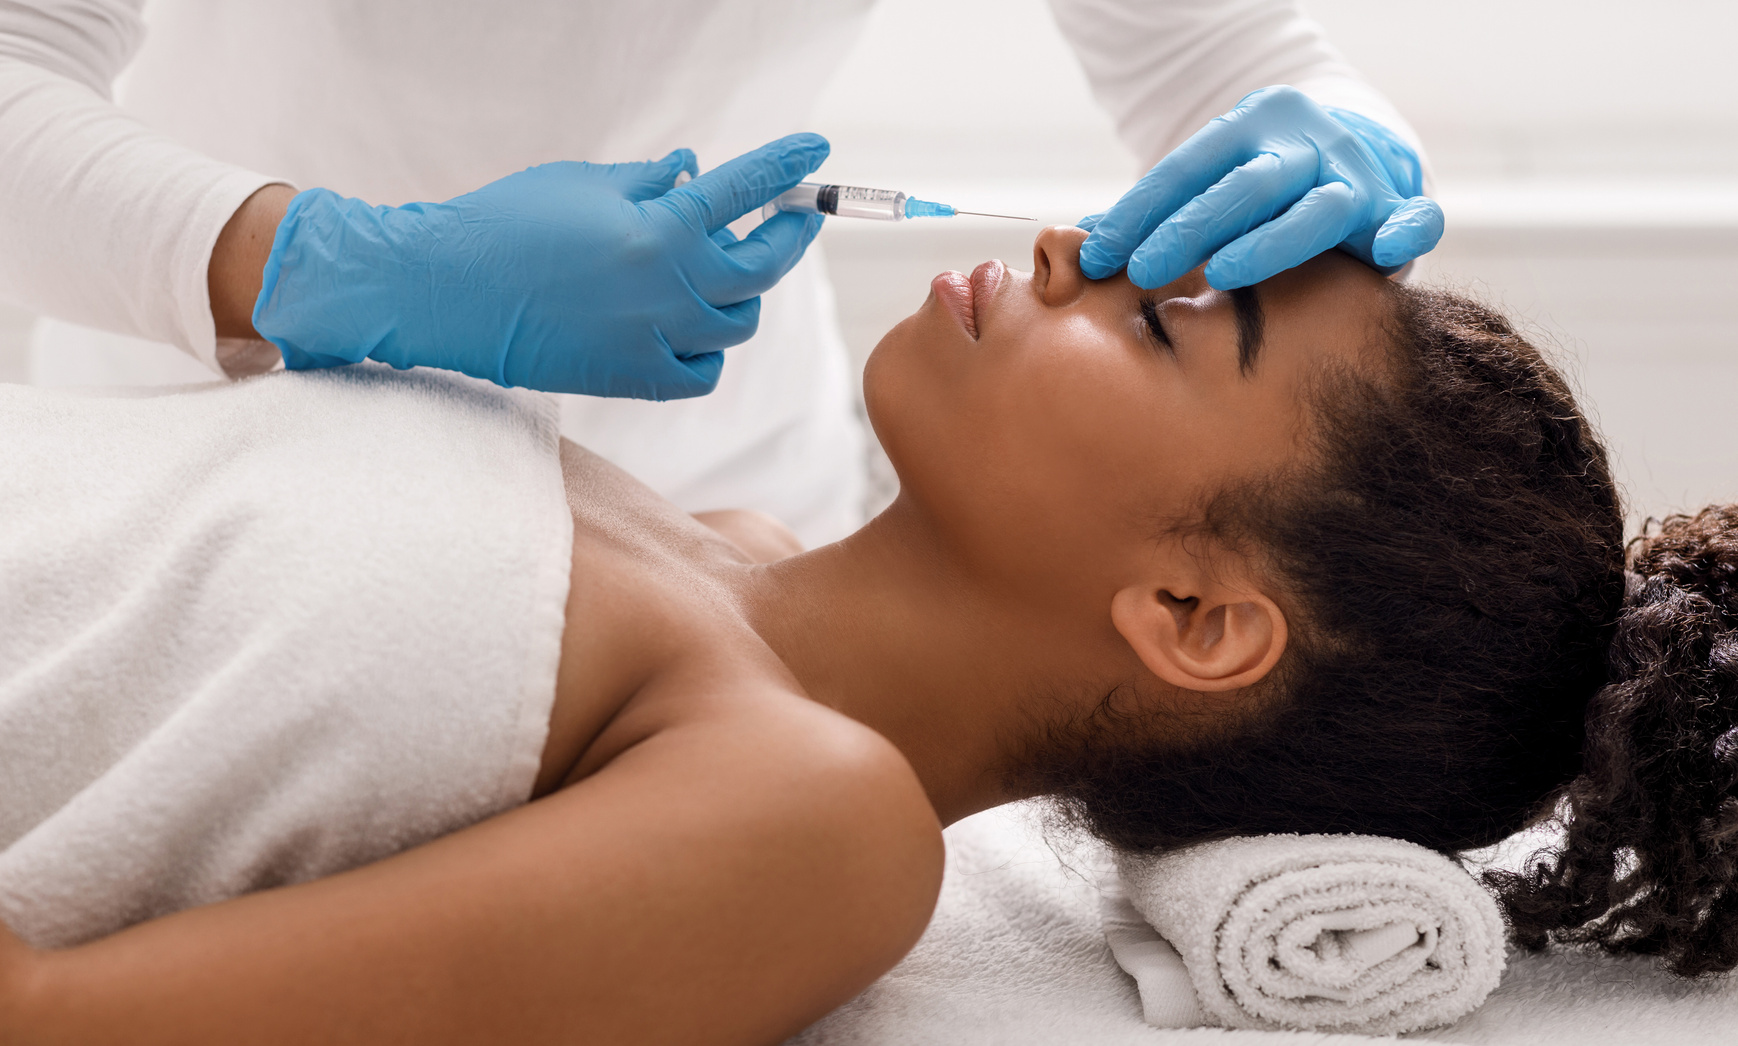 Black lady receiving beauty injections for nose zone